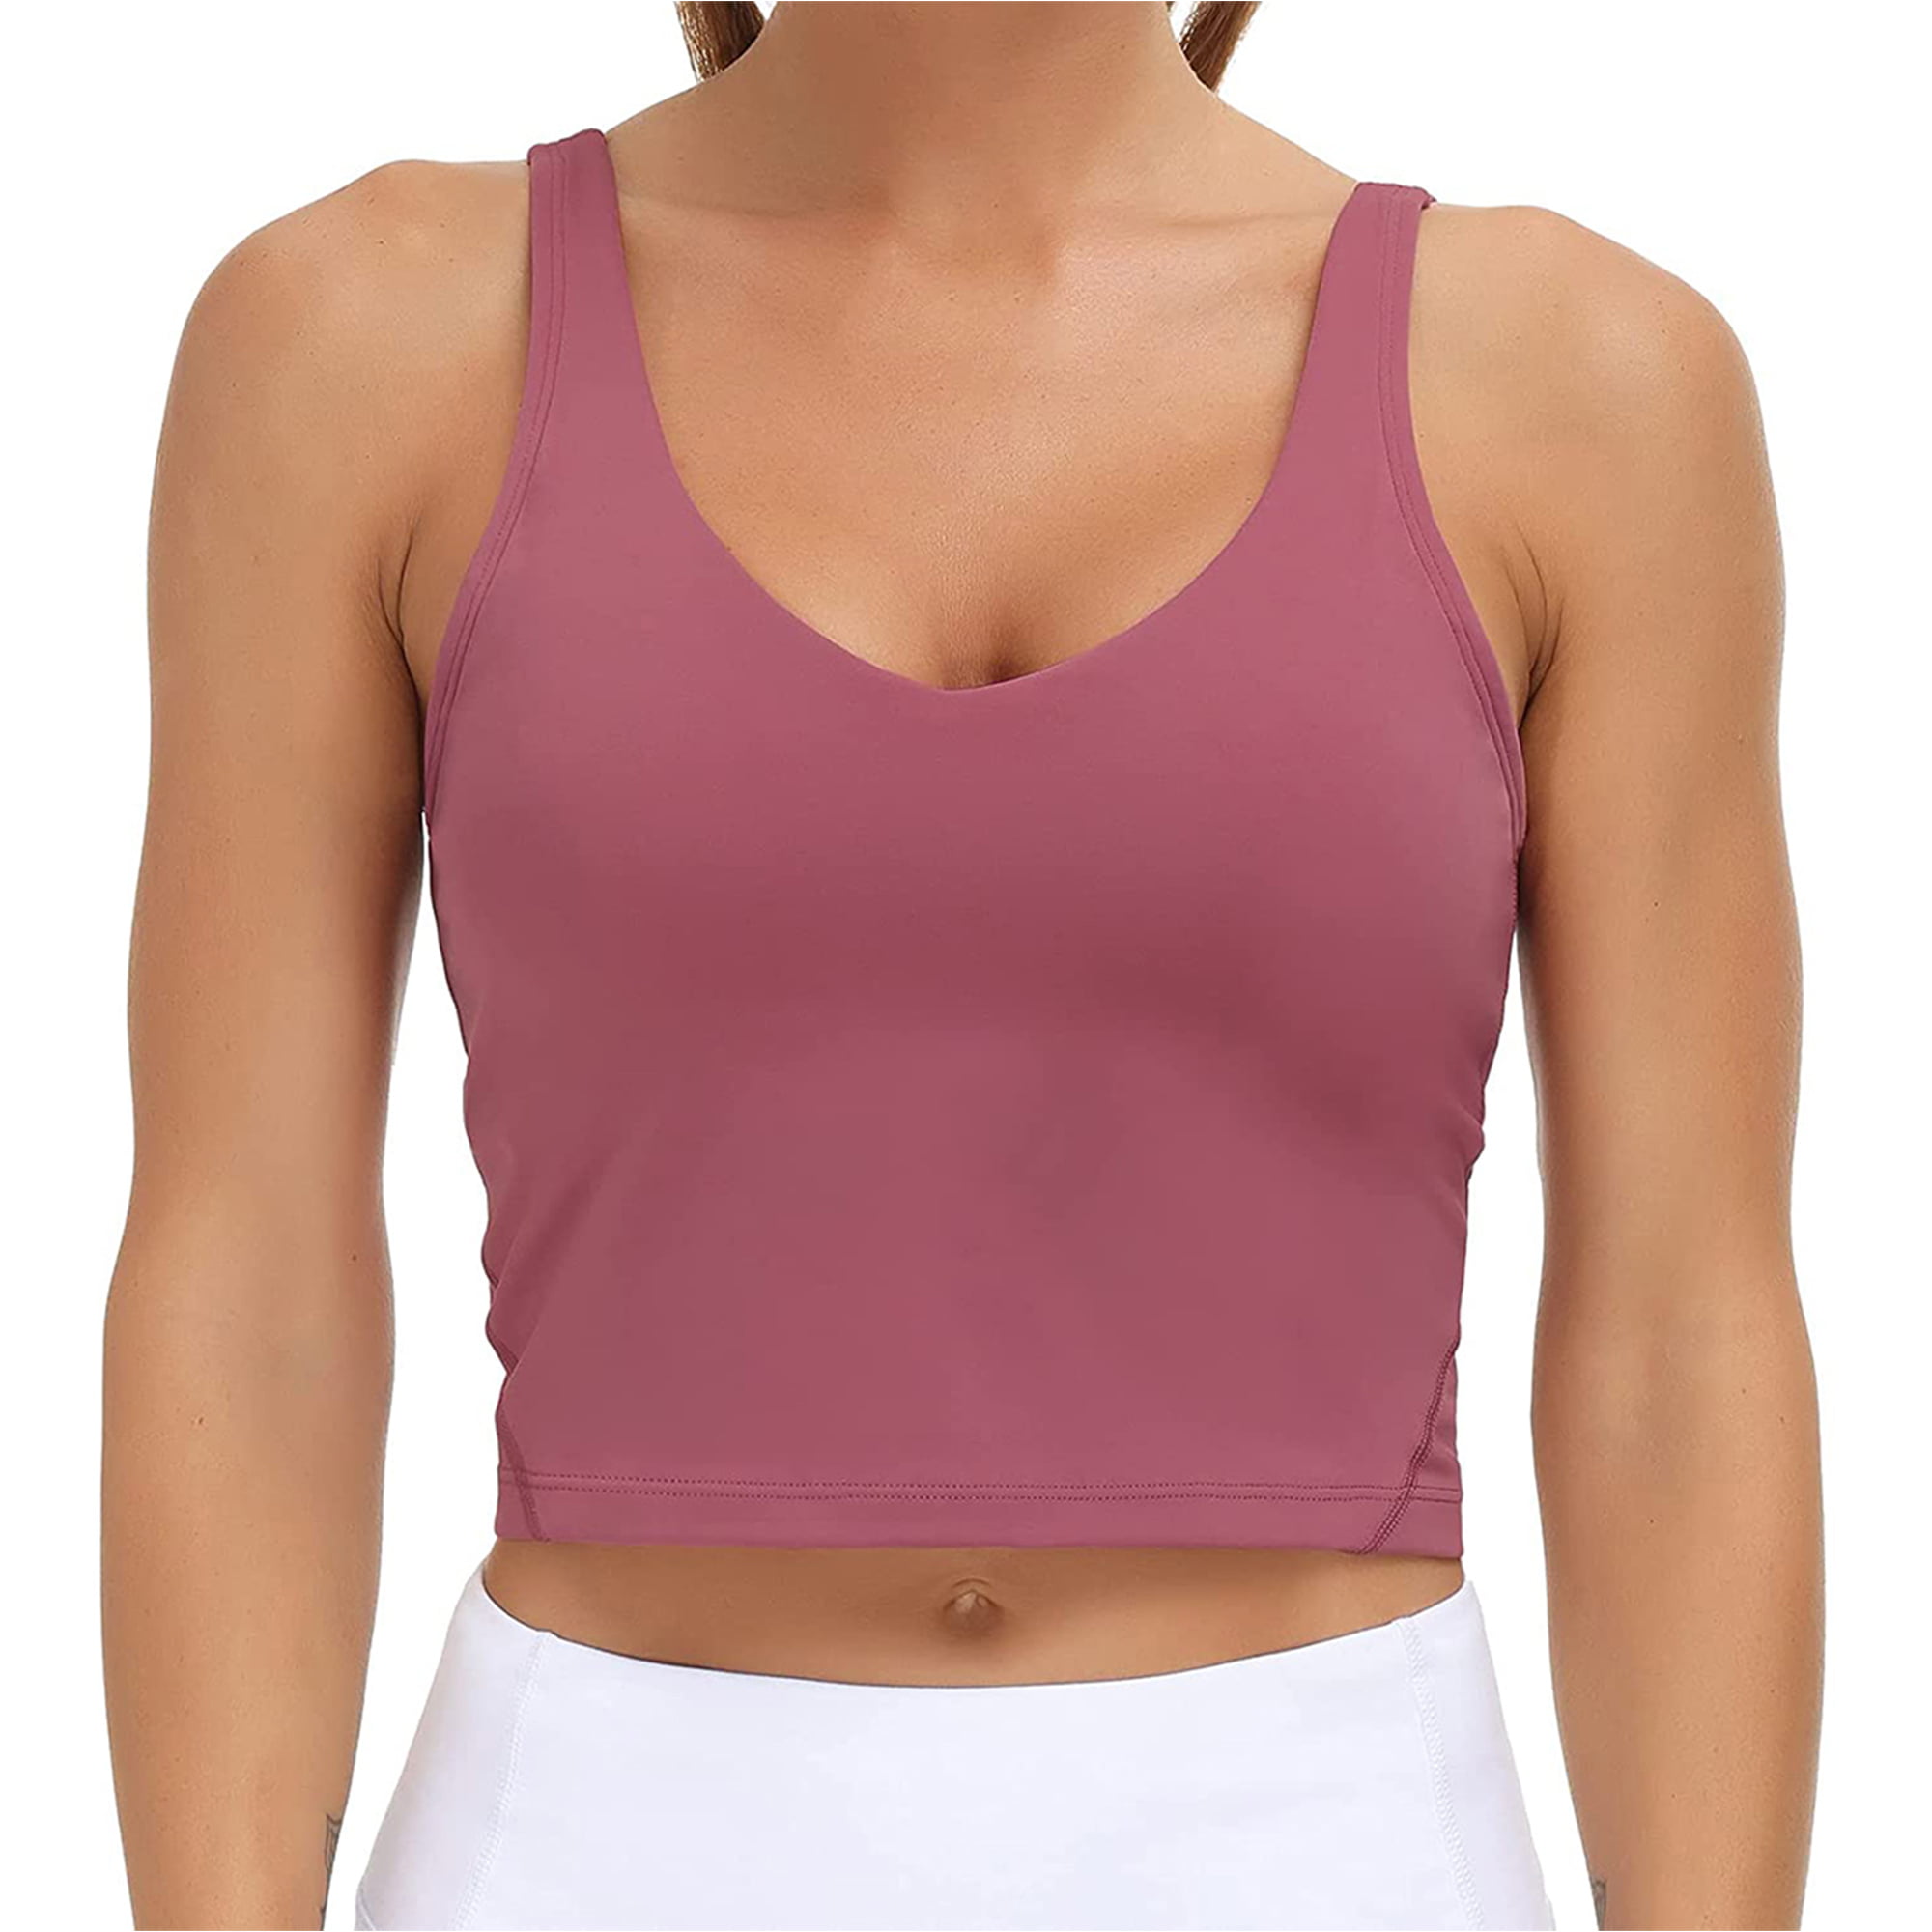 THE GYM PEOPLE Women's Longline Sports Bra Wirefree Padded Medium Support  Yoga